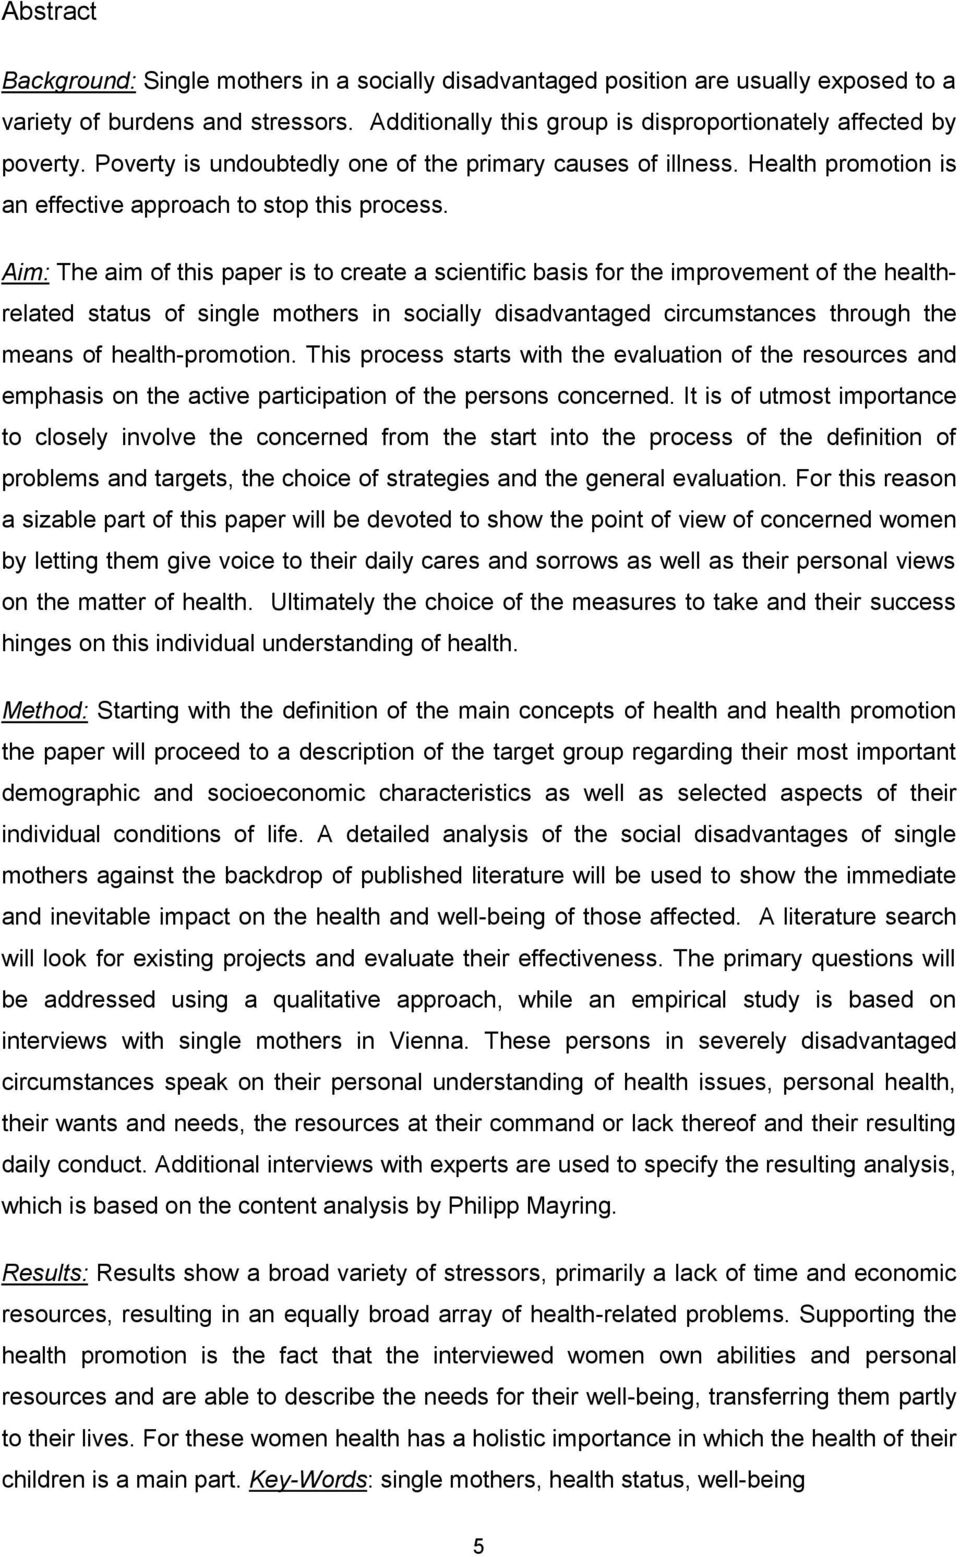 Aim: The aim of this paper is to create a scientific basis for the improvement of the healthrelated status of single mothers in socially disadvantaged circumstances through the means of